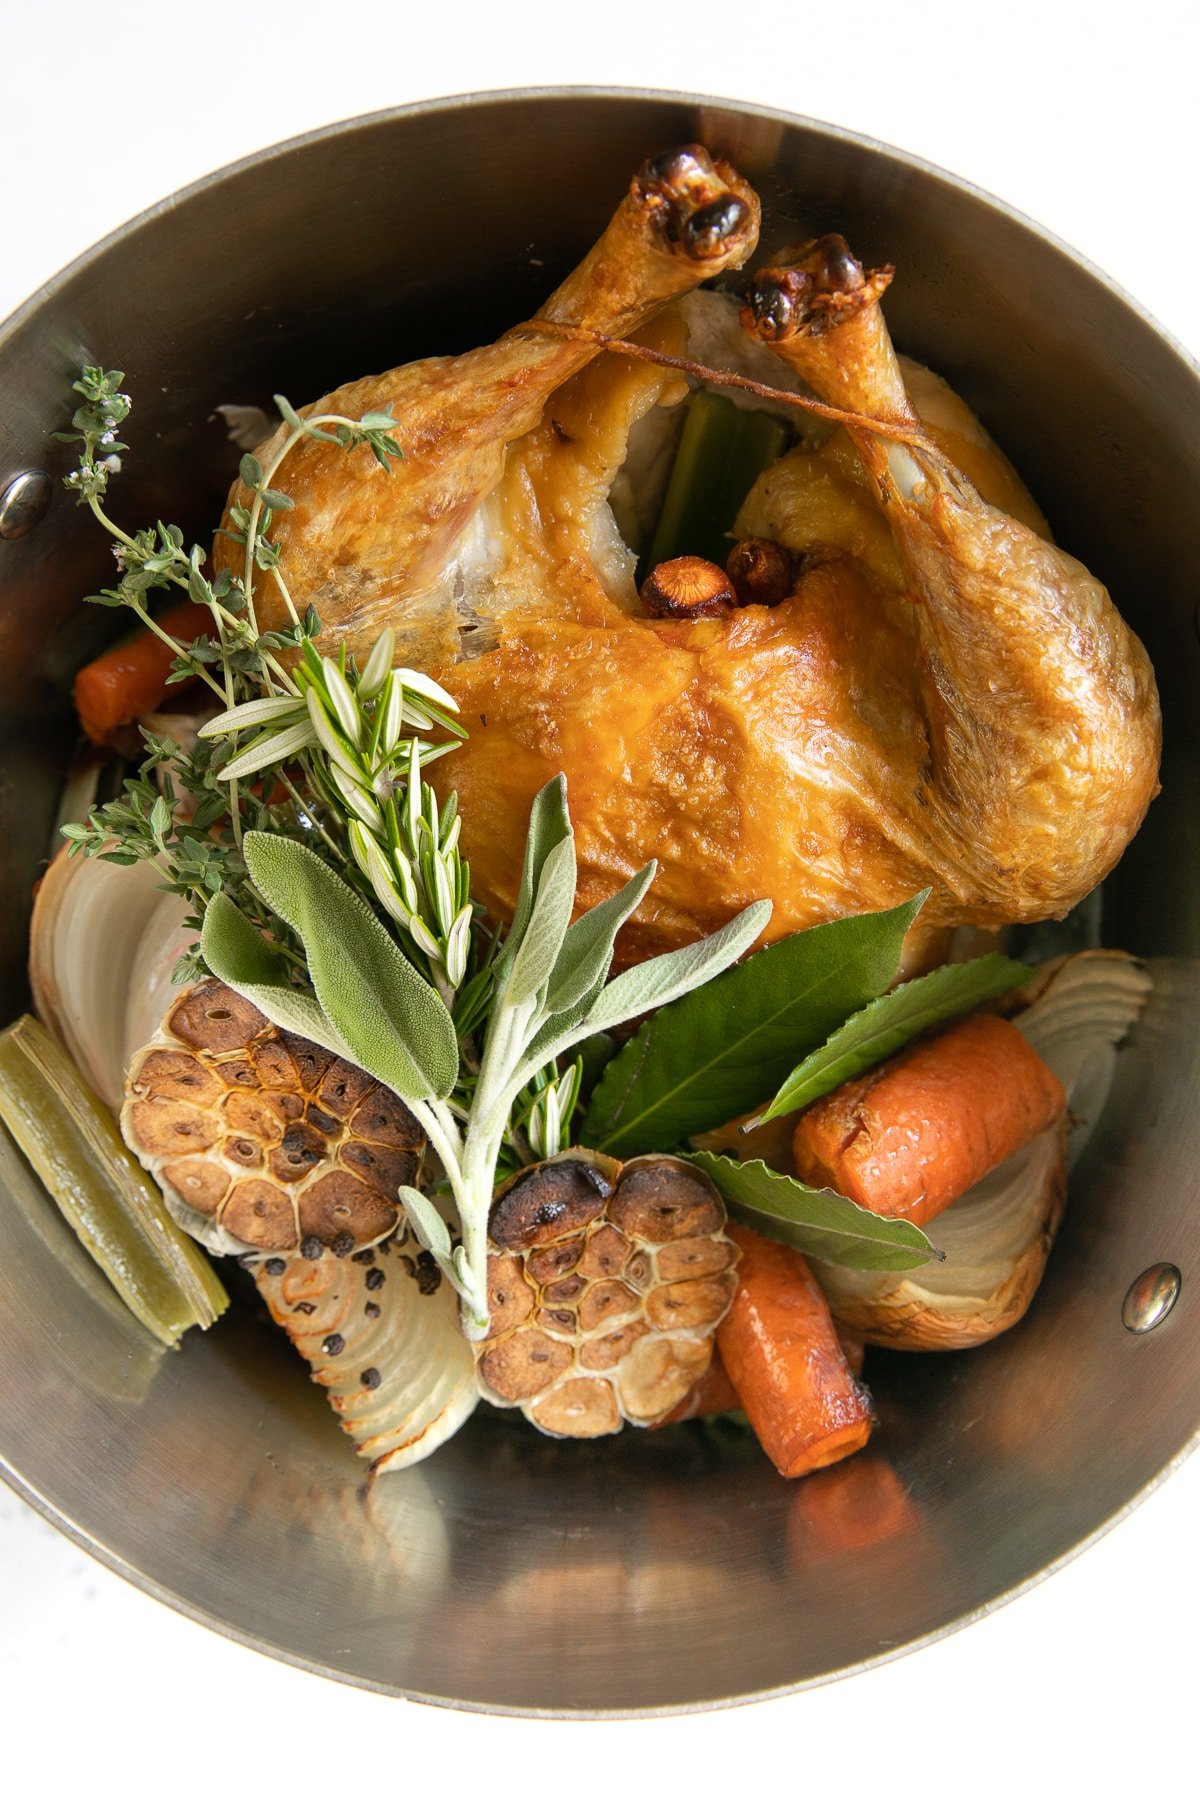 Large stock pot filled with one whole browned chicken, garlic, vegetables, and fresh herbs.